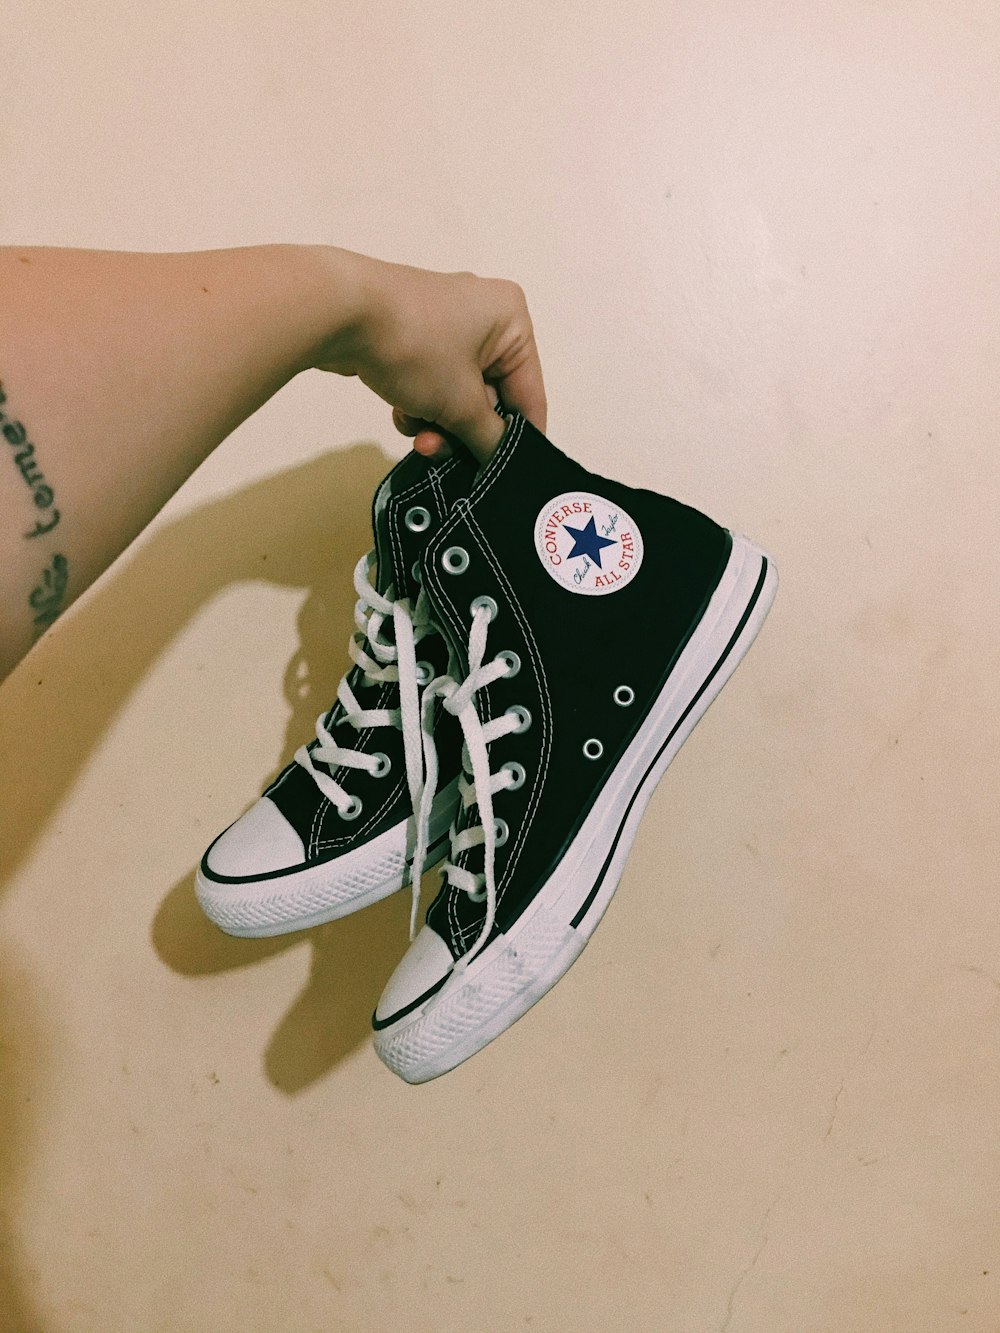 person wearing black converse all star high top sneakers photo – Free Shoes  Image on Unsplash